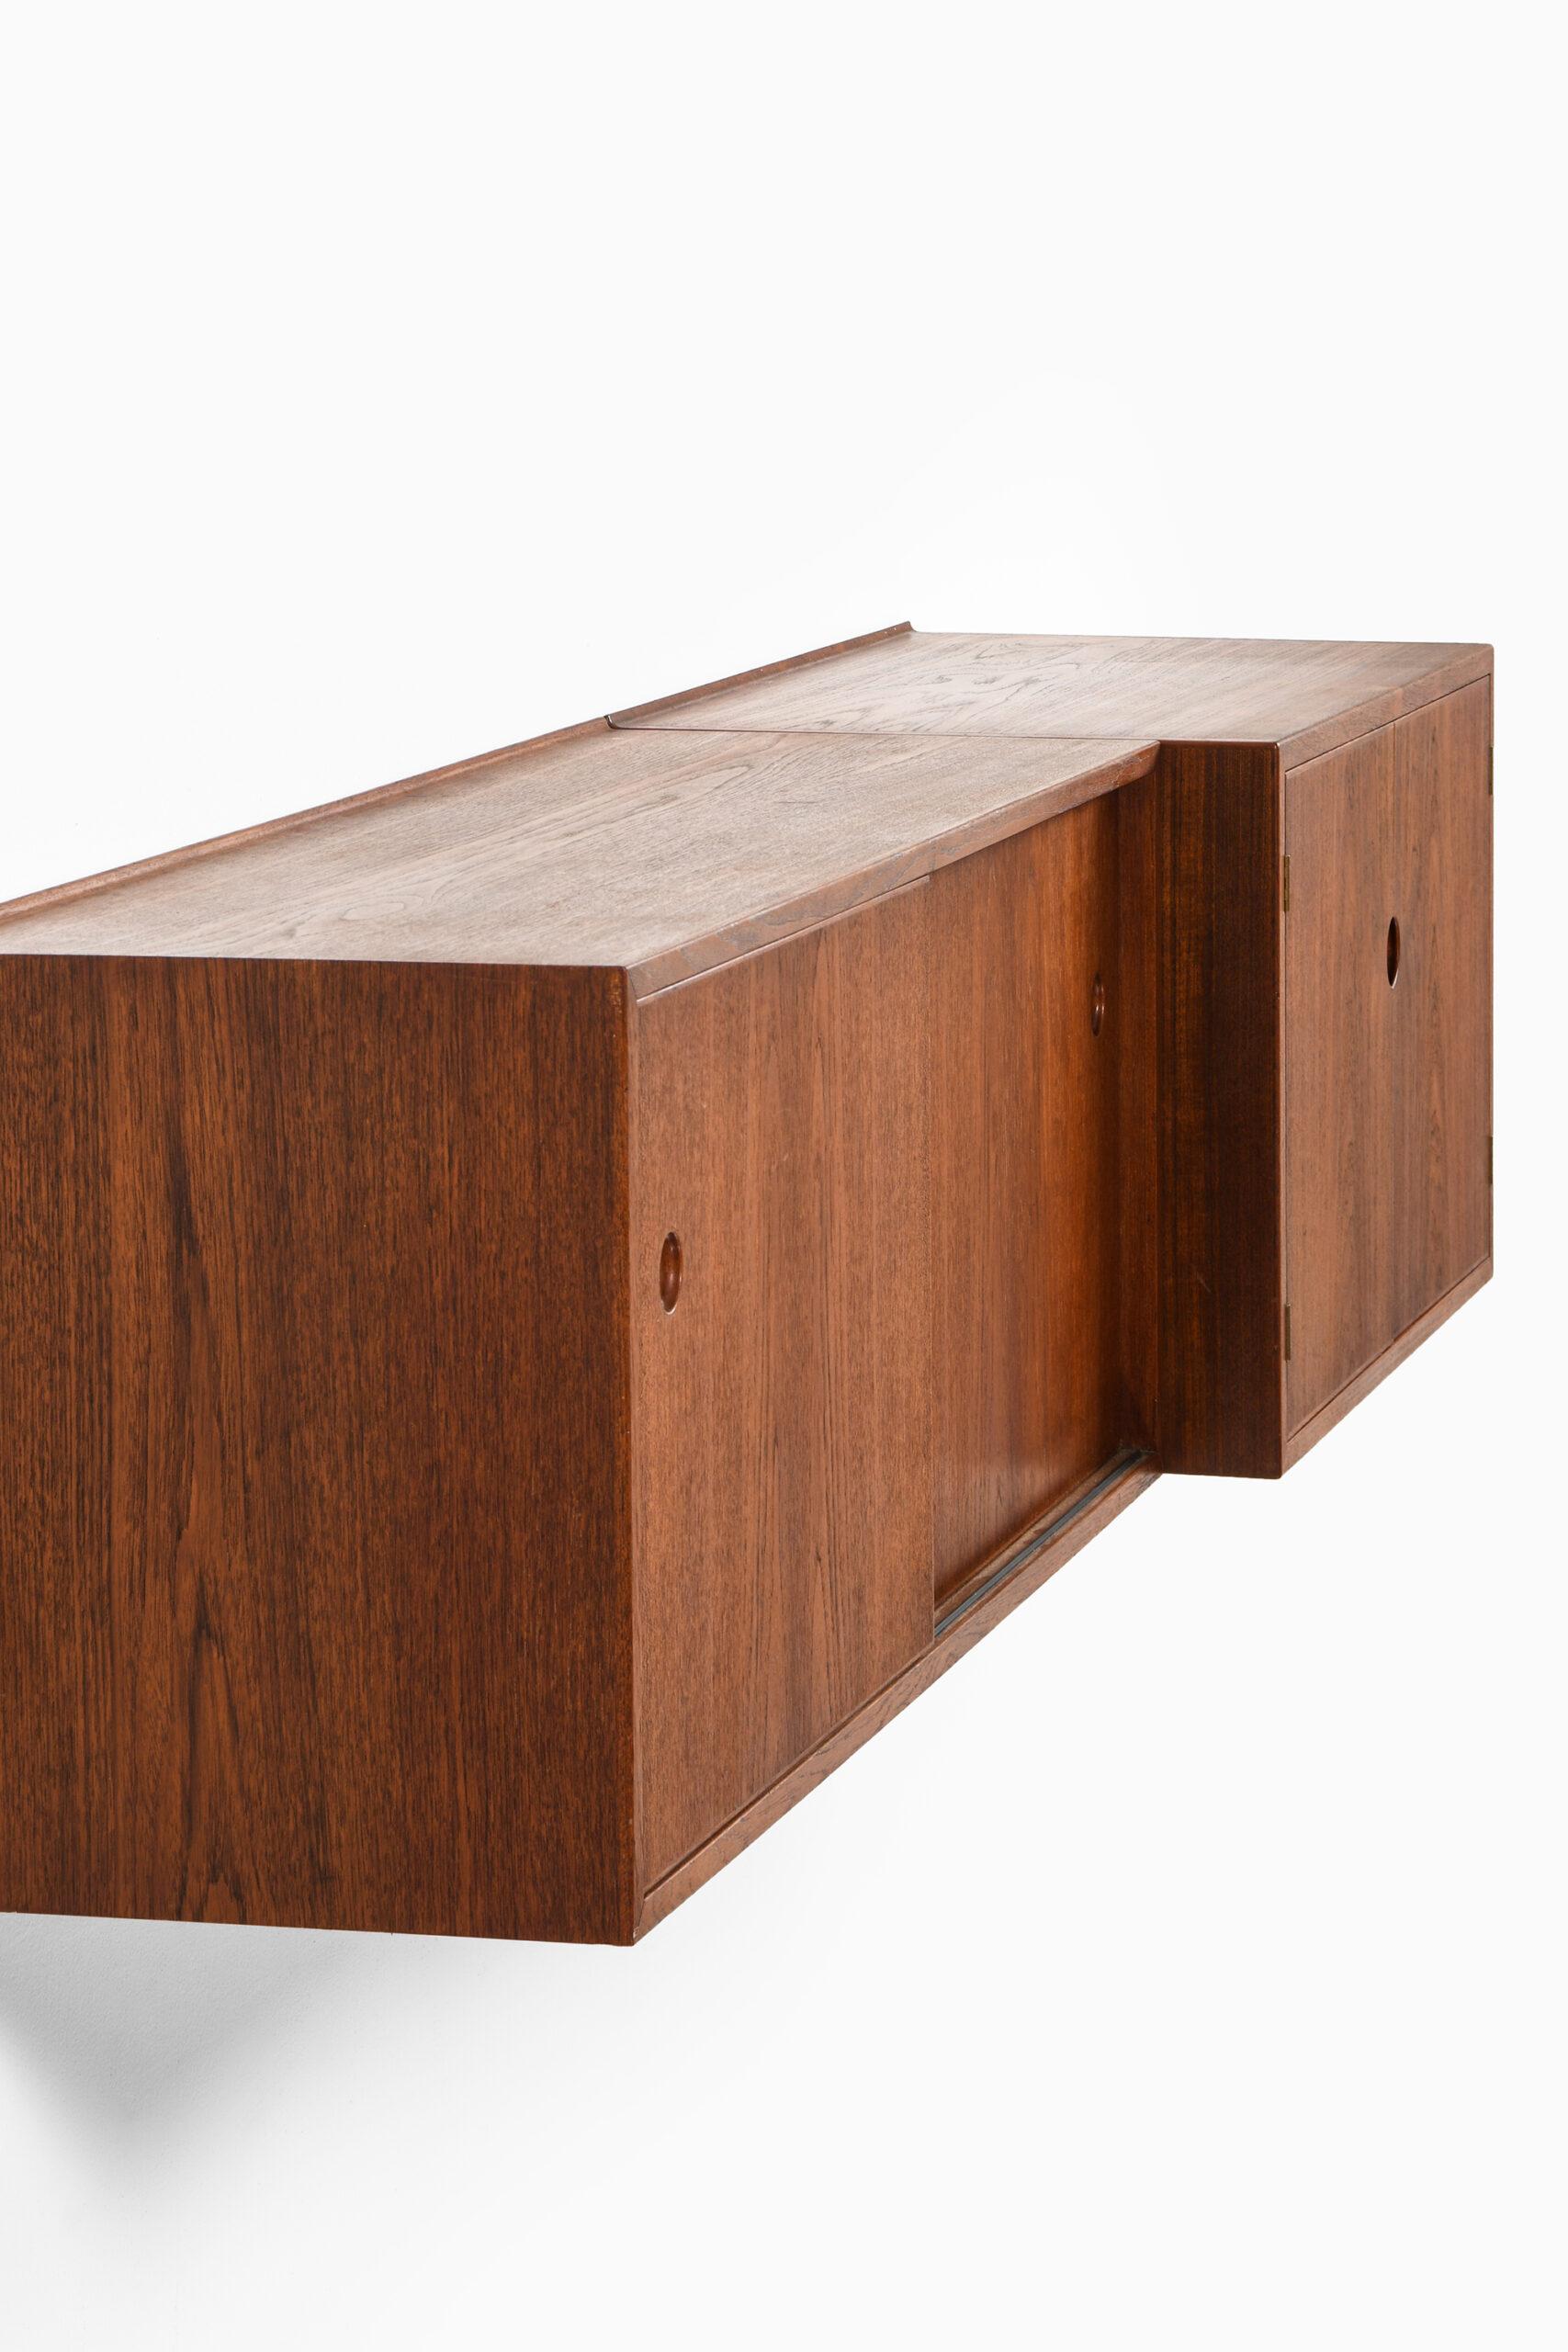 Rare wall mounted sideboards designed by Hans Wegner. Produced by cabinetmaker Johannes Hansen in Denmark.
Built in record player and storage compartments.
Dimensions (W x D x H): 128,5 x 40 x 51 cm.
Dimensions (W x D x H): 84 x 48 x 51 cm.